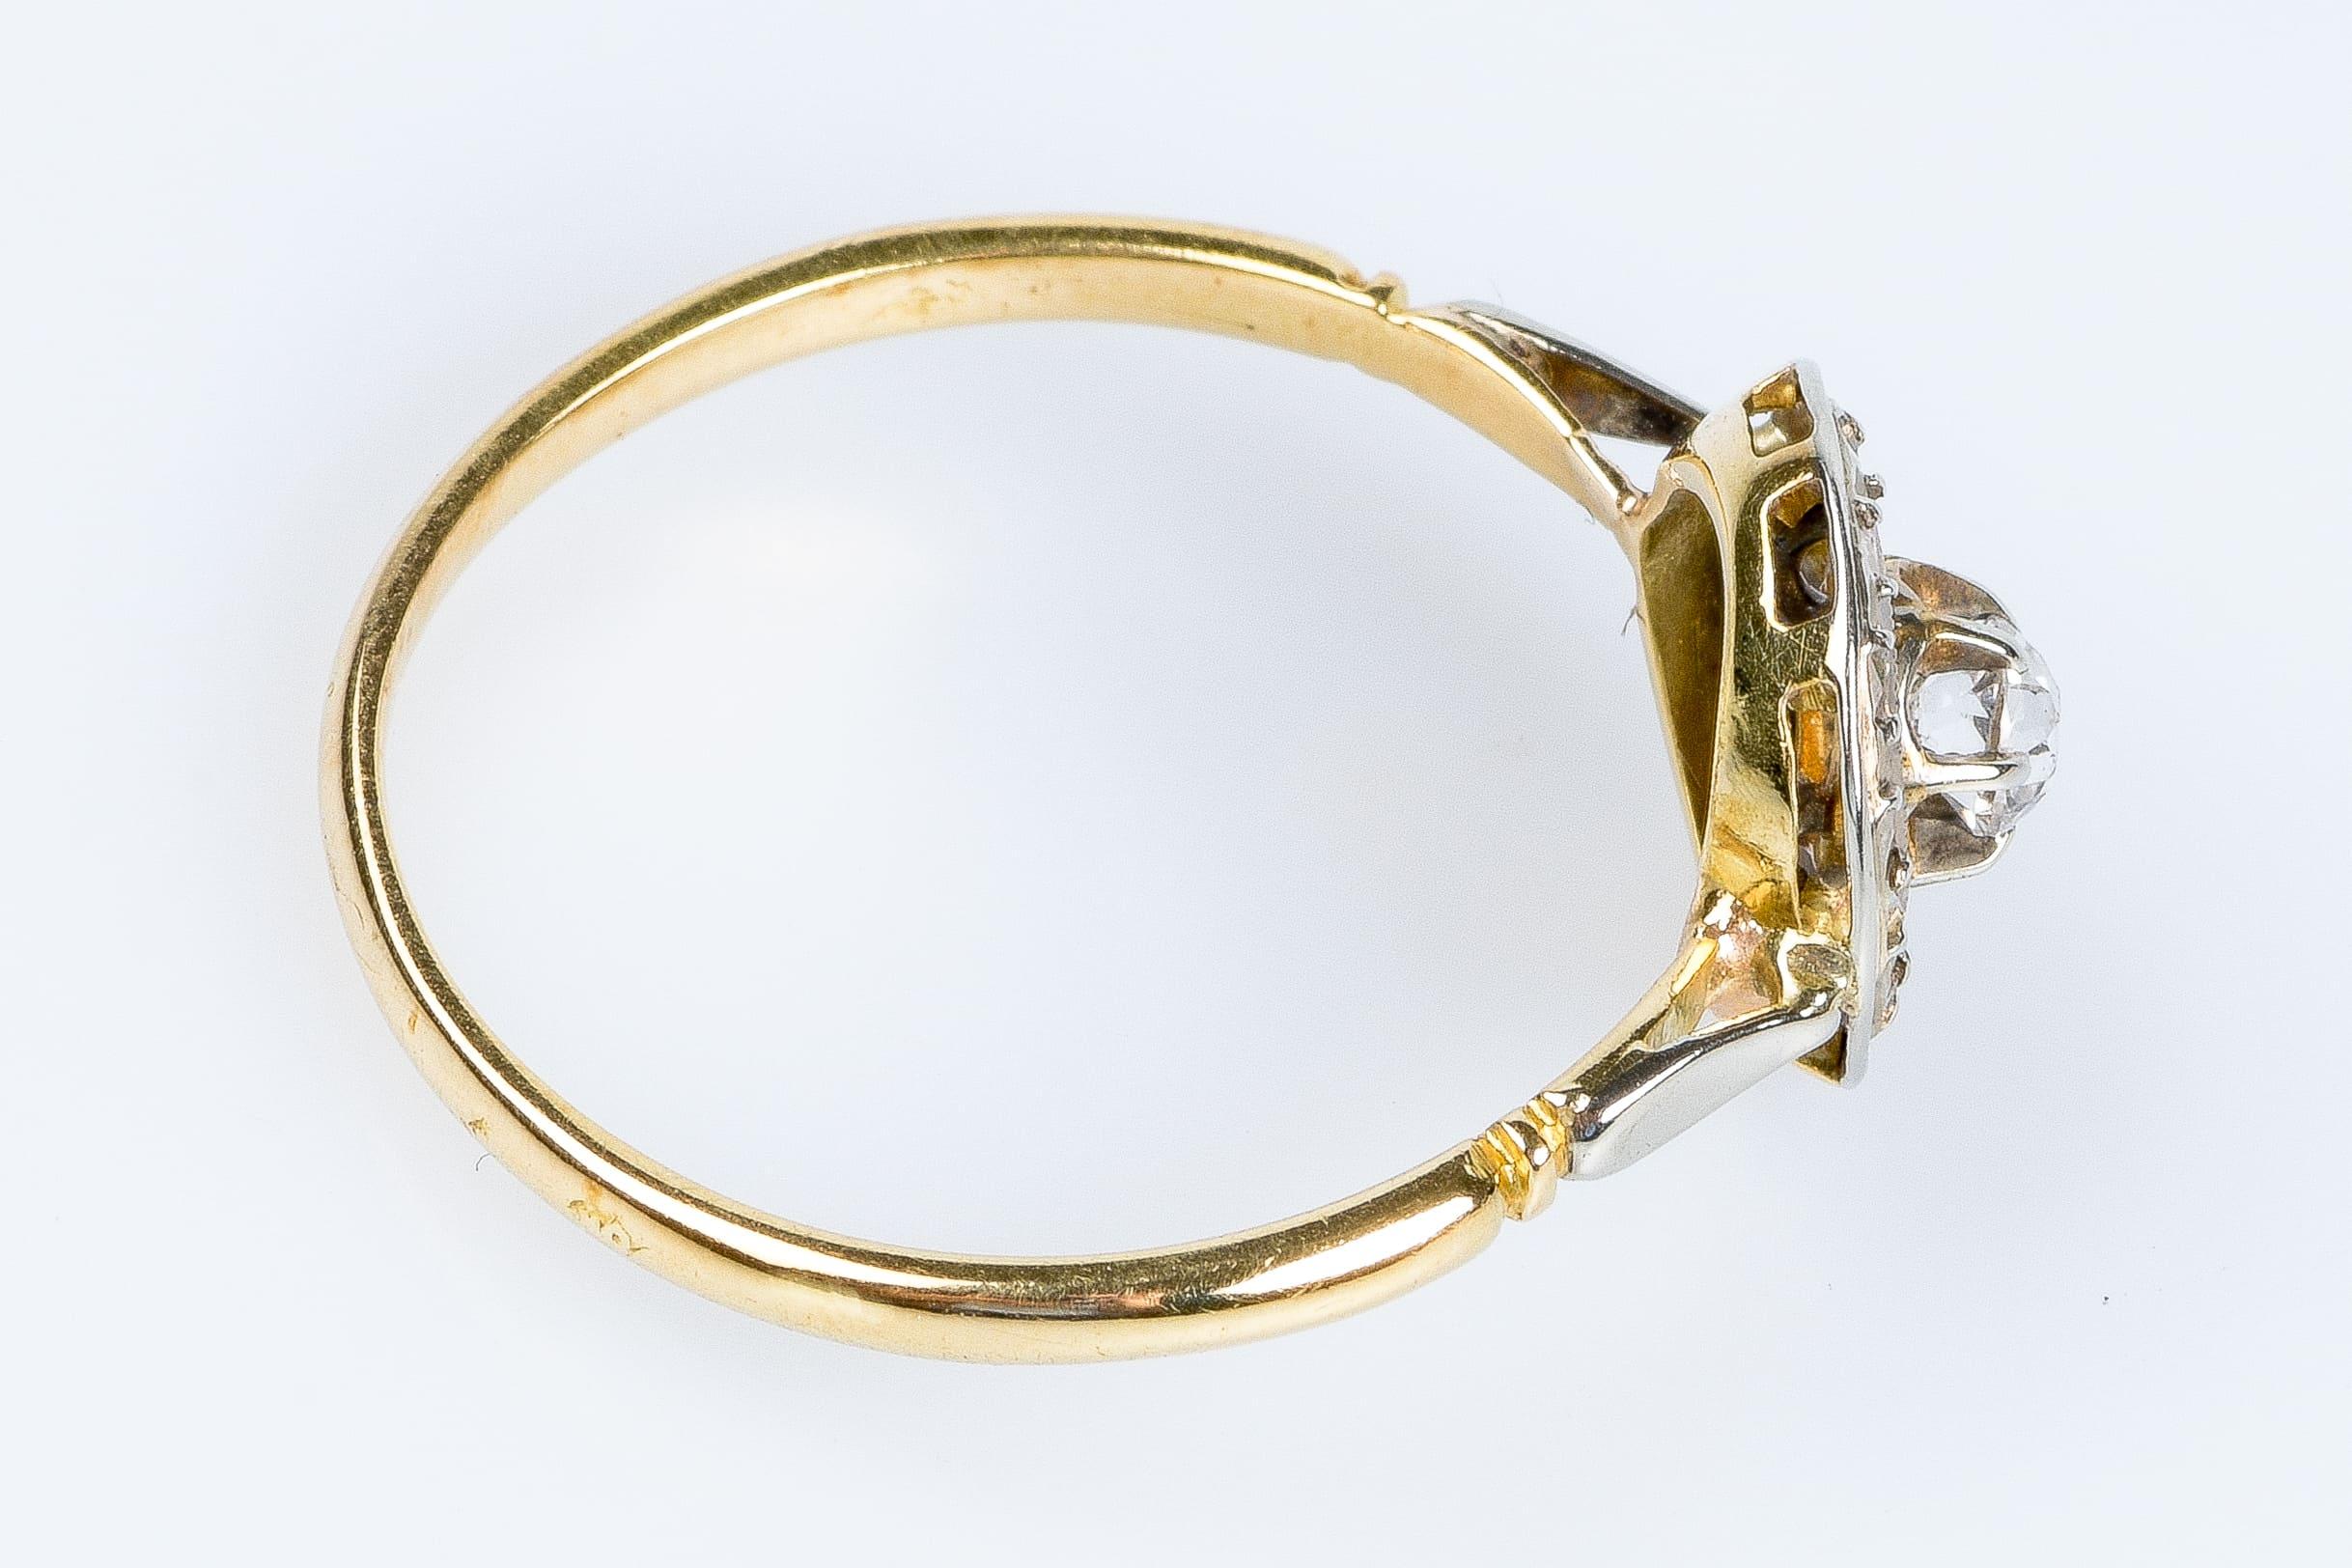 Antique 18-carat yellow gold ring decorated with zirconium oxide For Sale 4